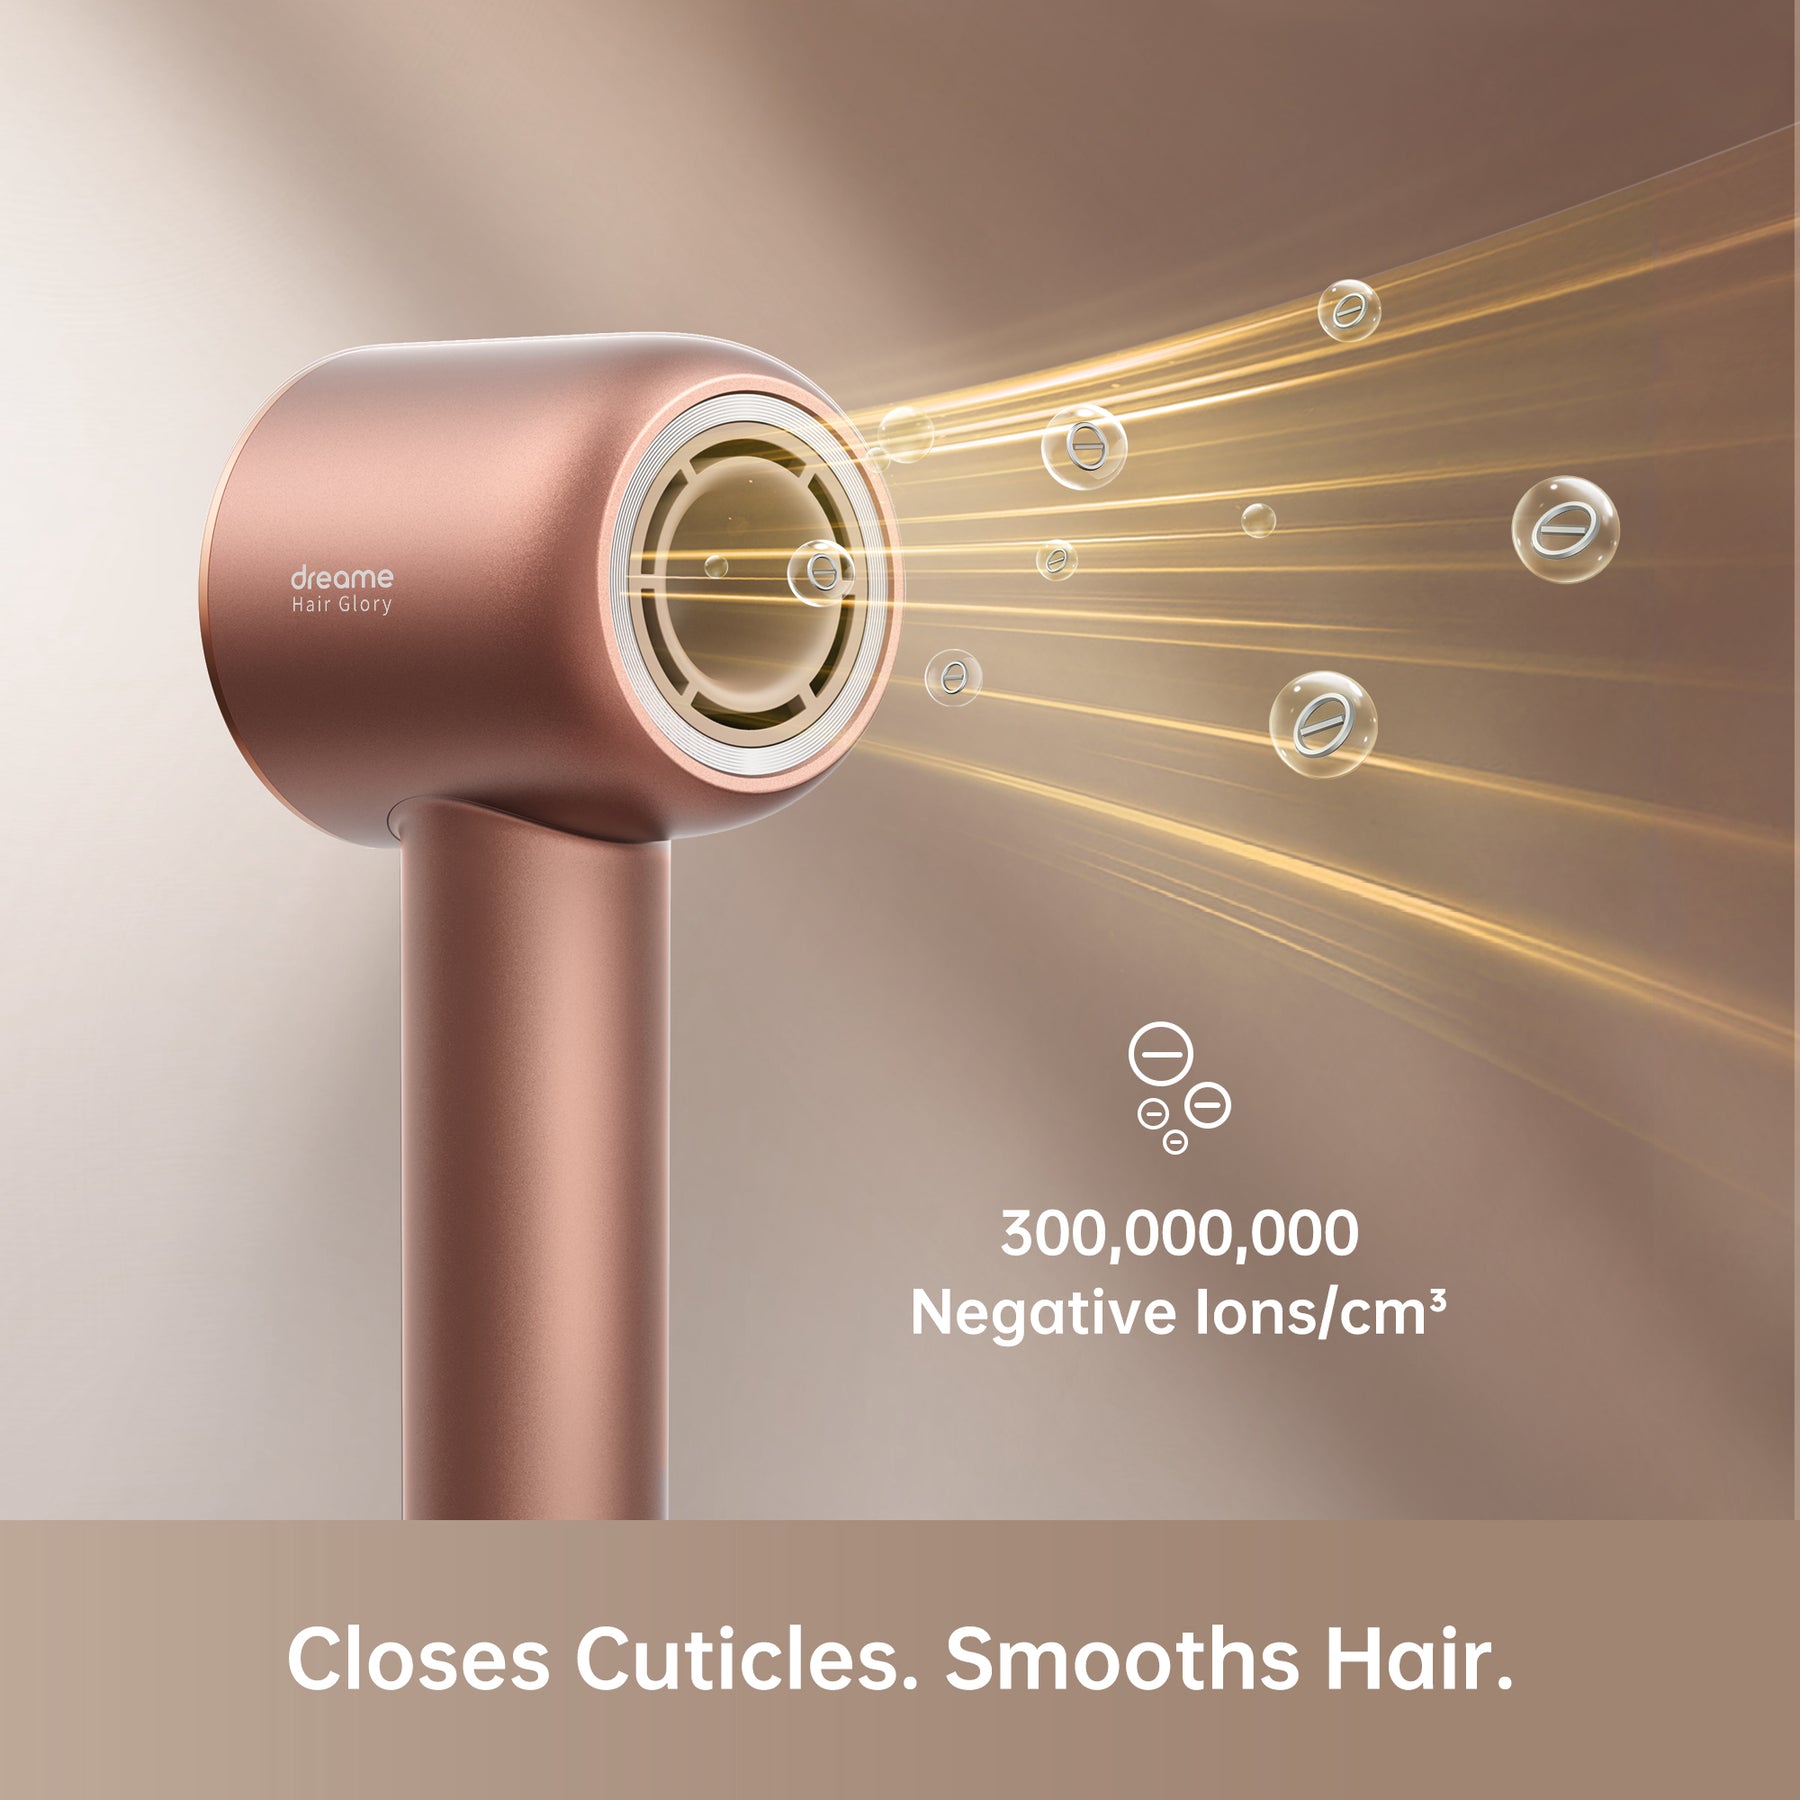 World's 1st Hair Dryer with Essence – Dreame Hair Glory – launching on 3  March 2023